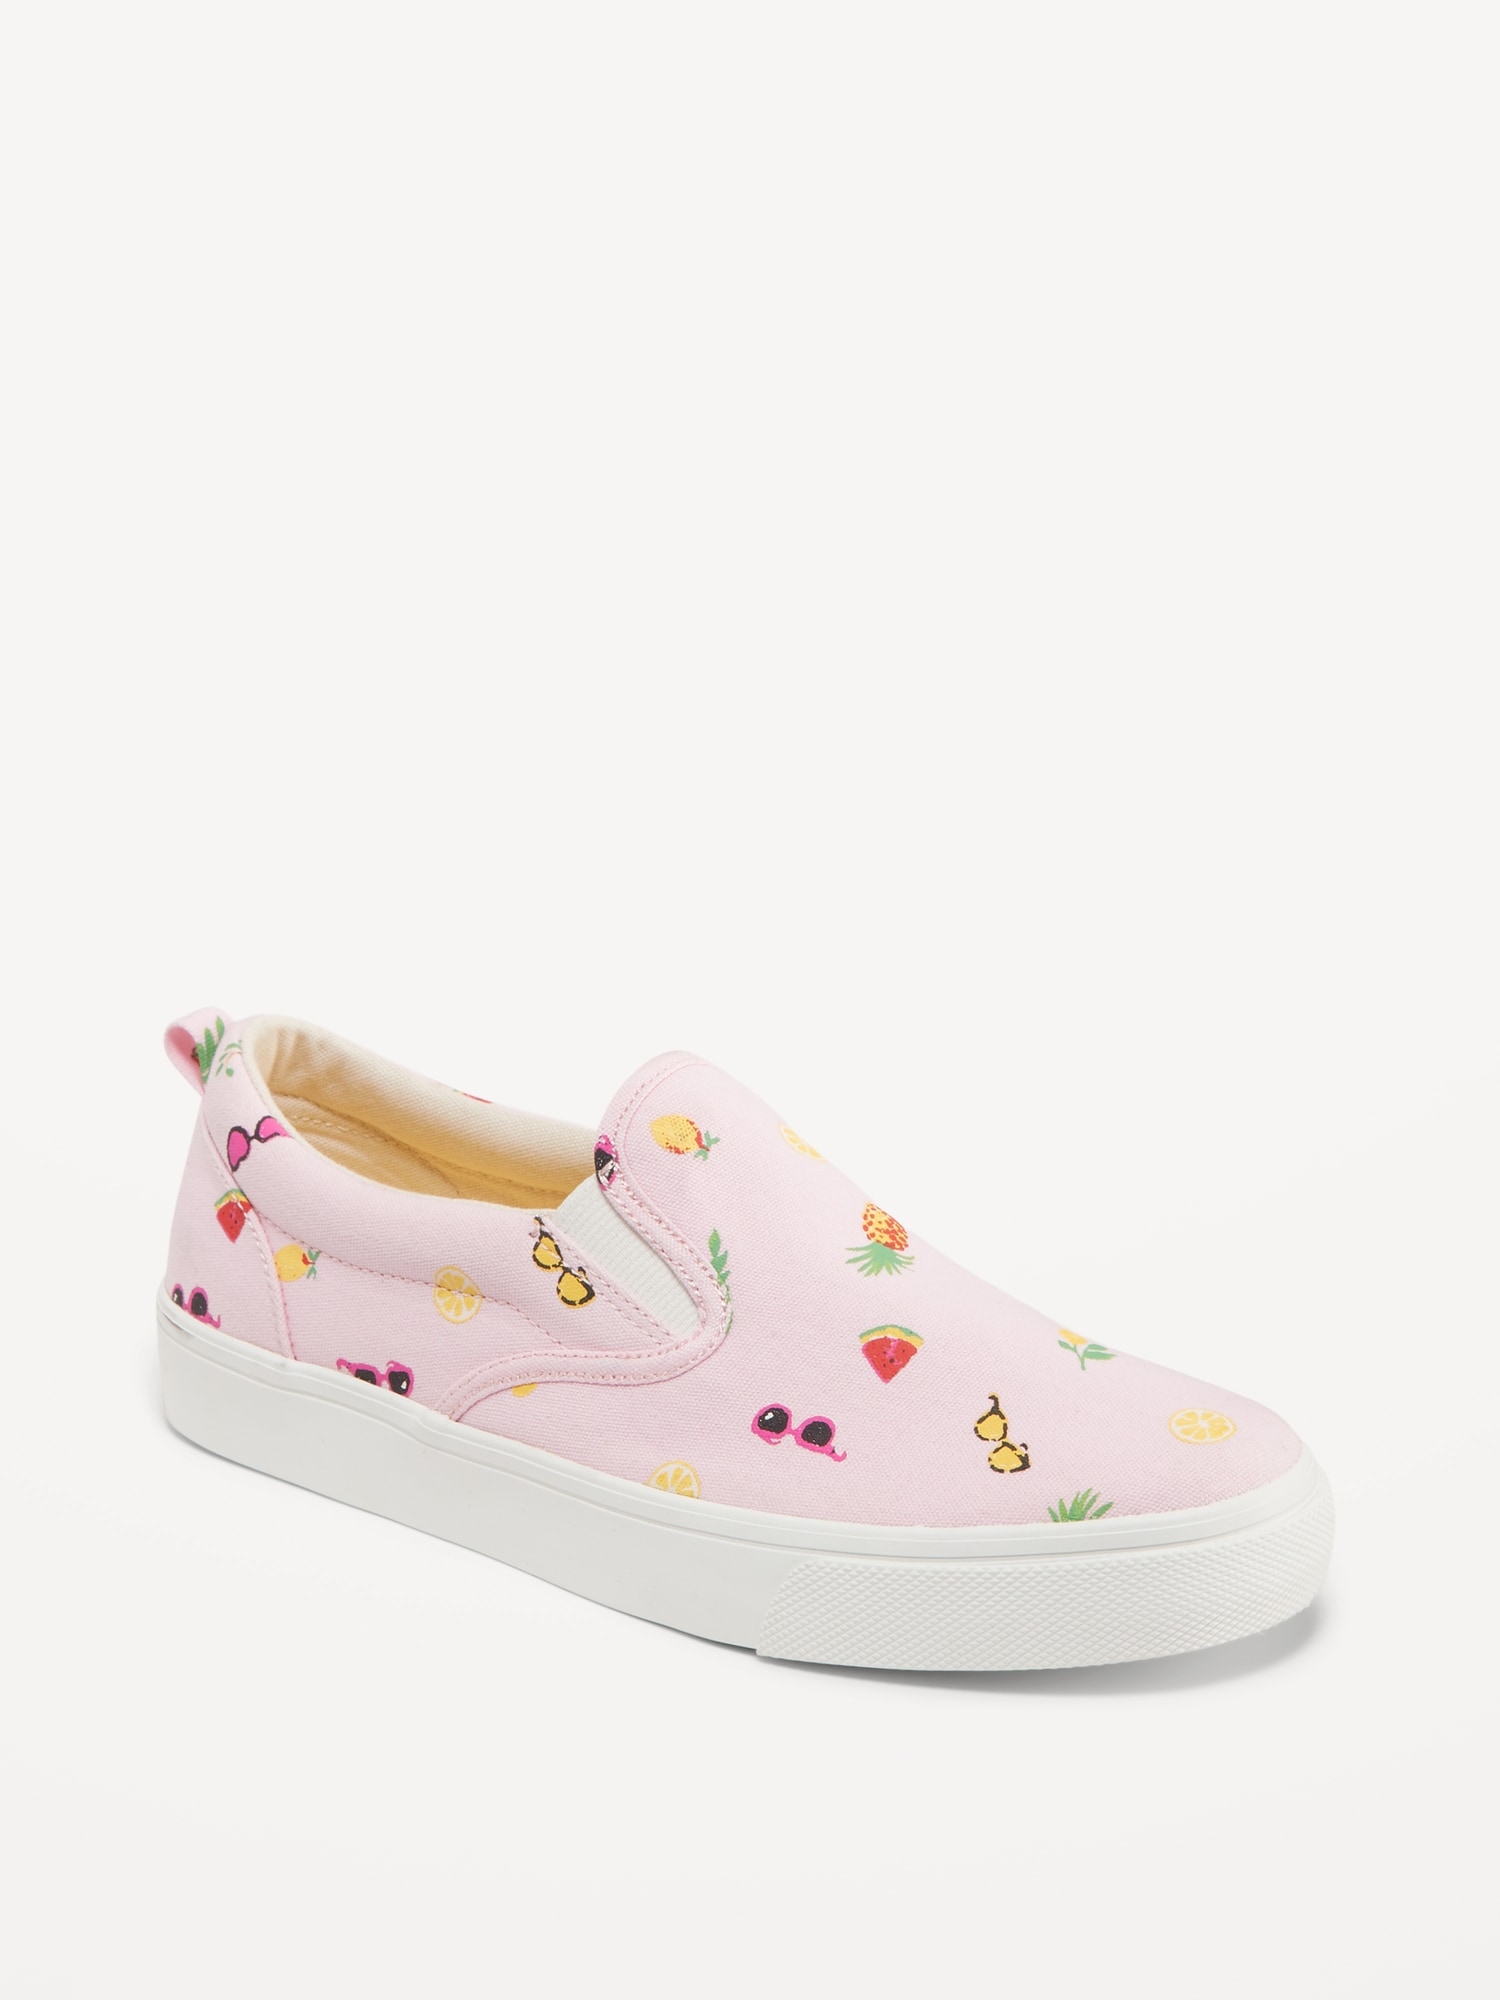 Canvas Slip-On Sneakers for Girls | Old Navy